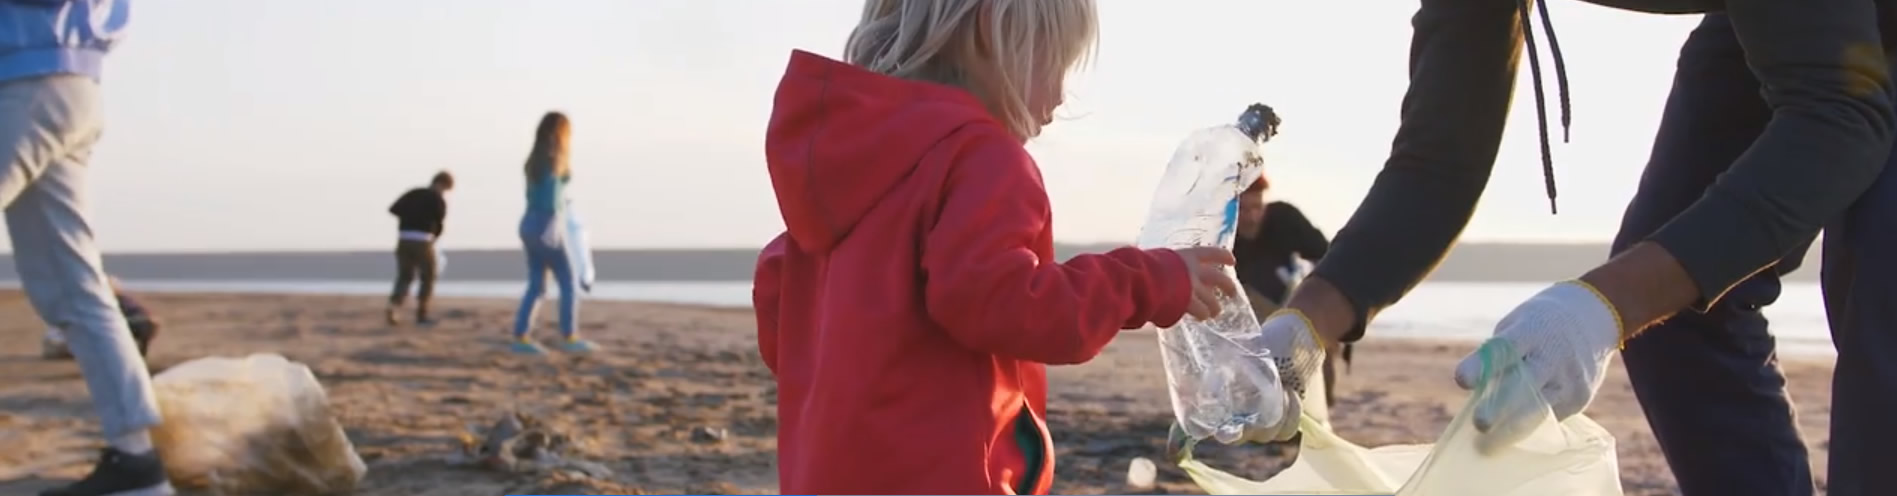 Toddler clearing up rubbish on beach